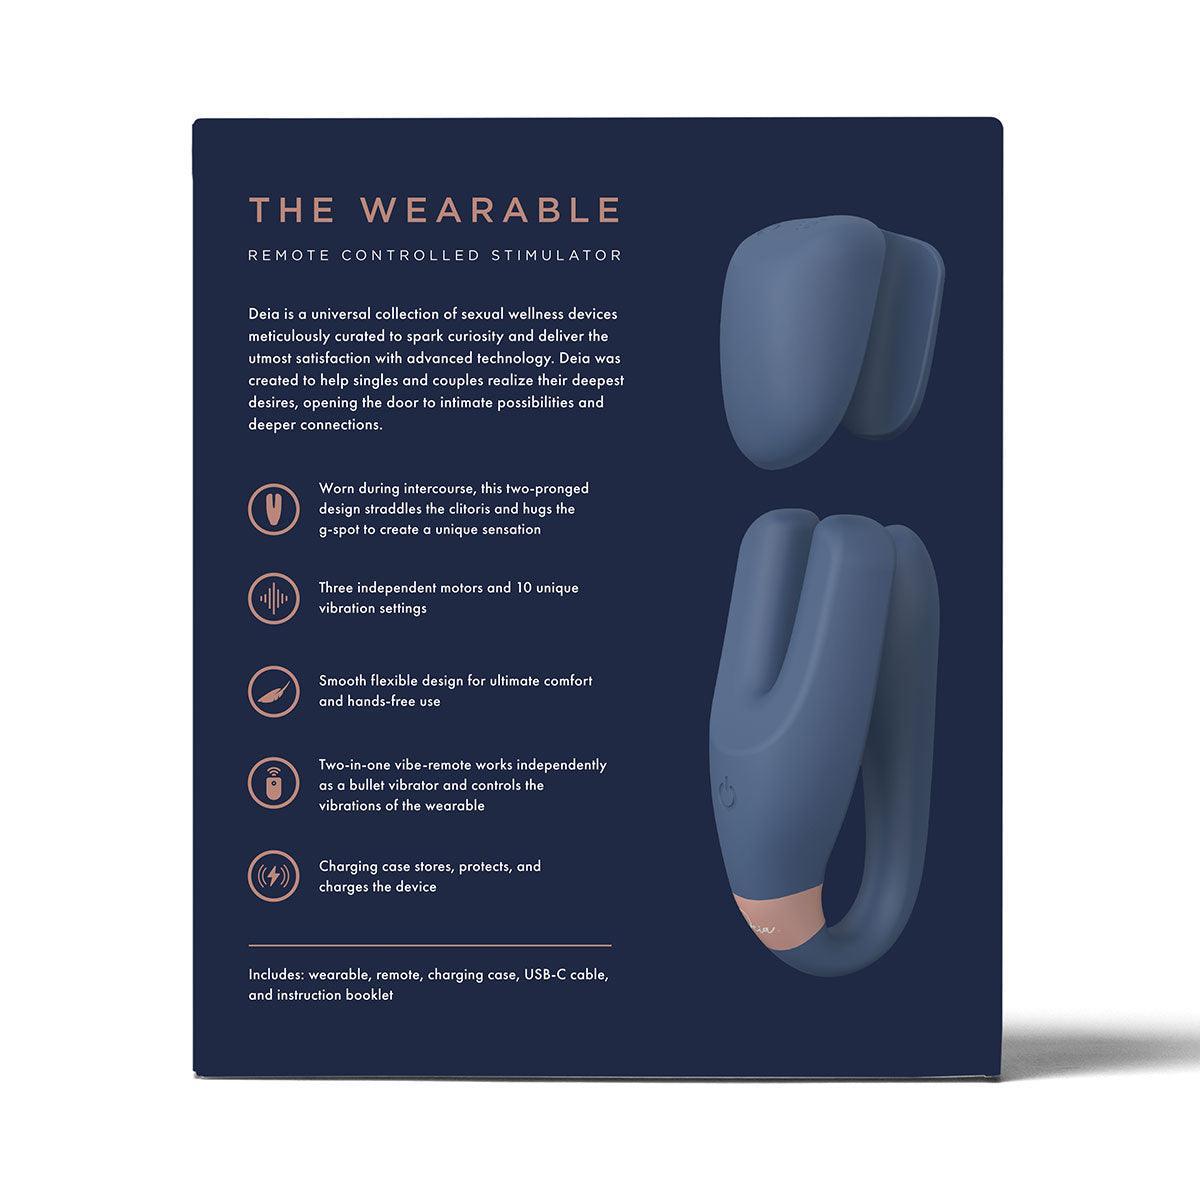 The Wearable by Deia